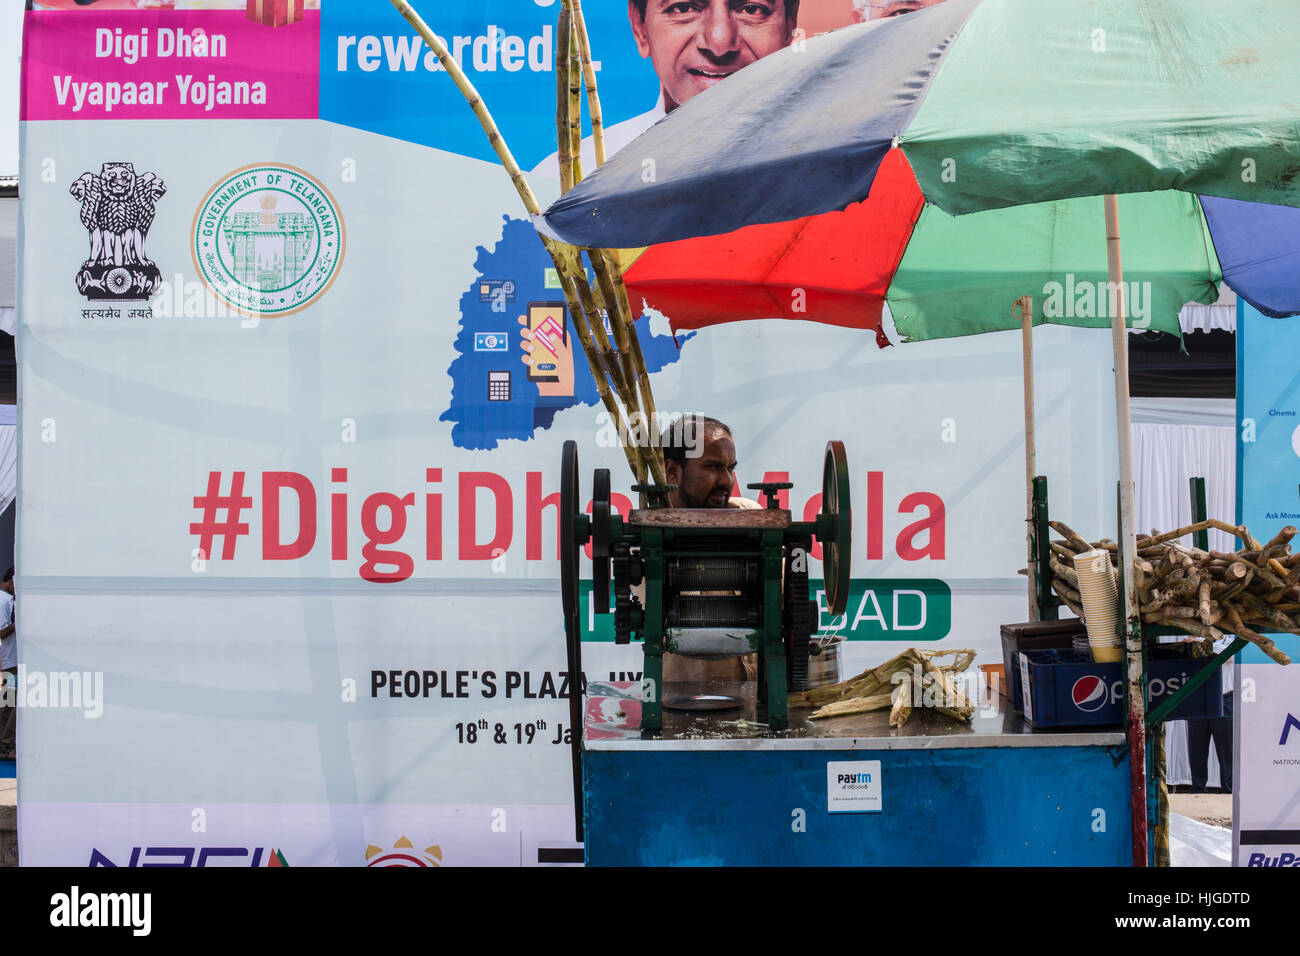 HYDERABAD,INDIA - JAN 19,2017 A Sugarcane juice vendor promotes digital payments by displaying stickers of ewallet at digi dhan mela in the city. Stock Photo